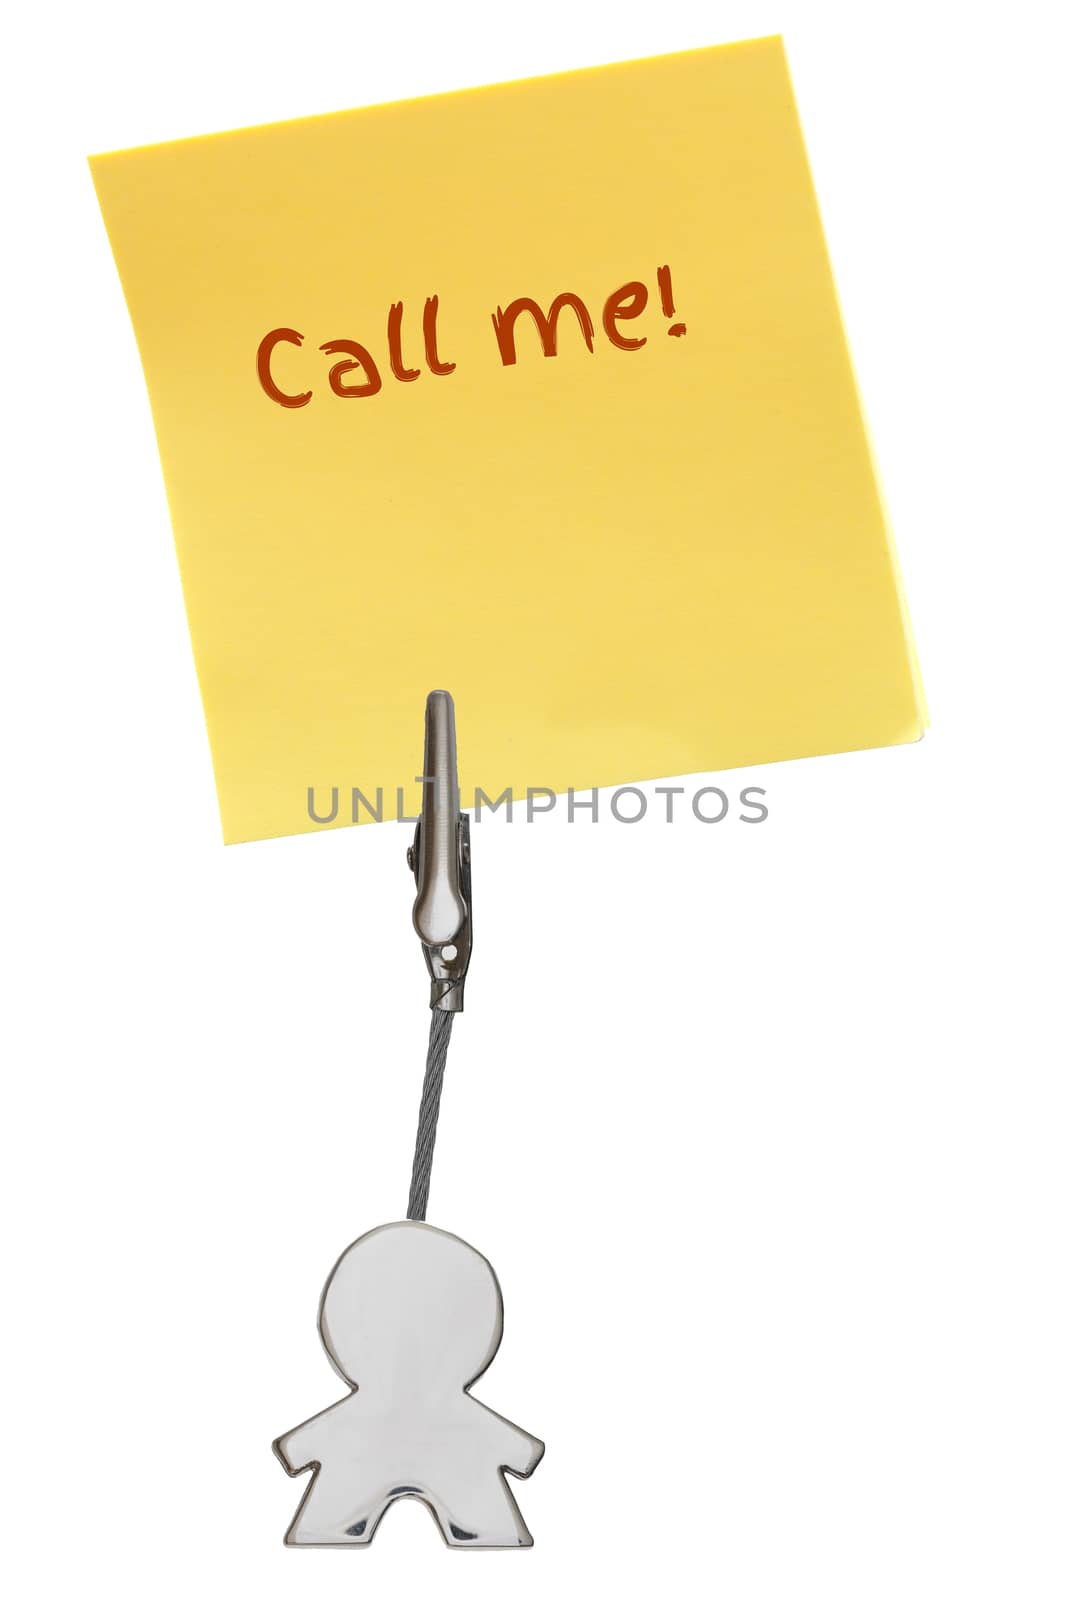 Man Figure Business Card Holder with yellow paper note Call me by asafaric